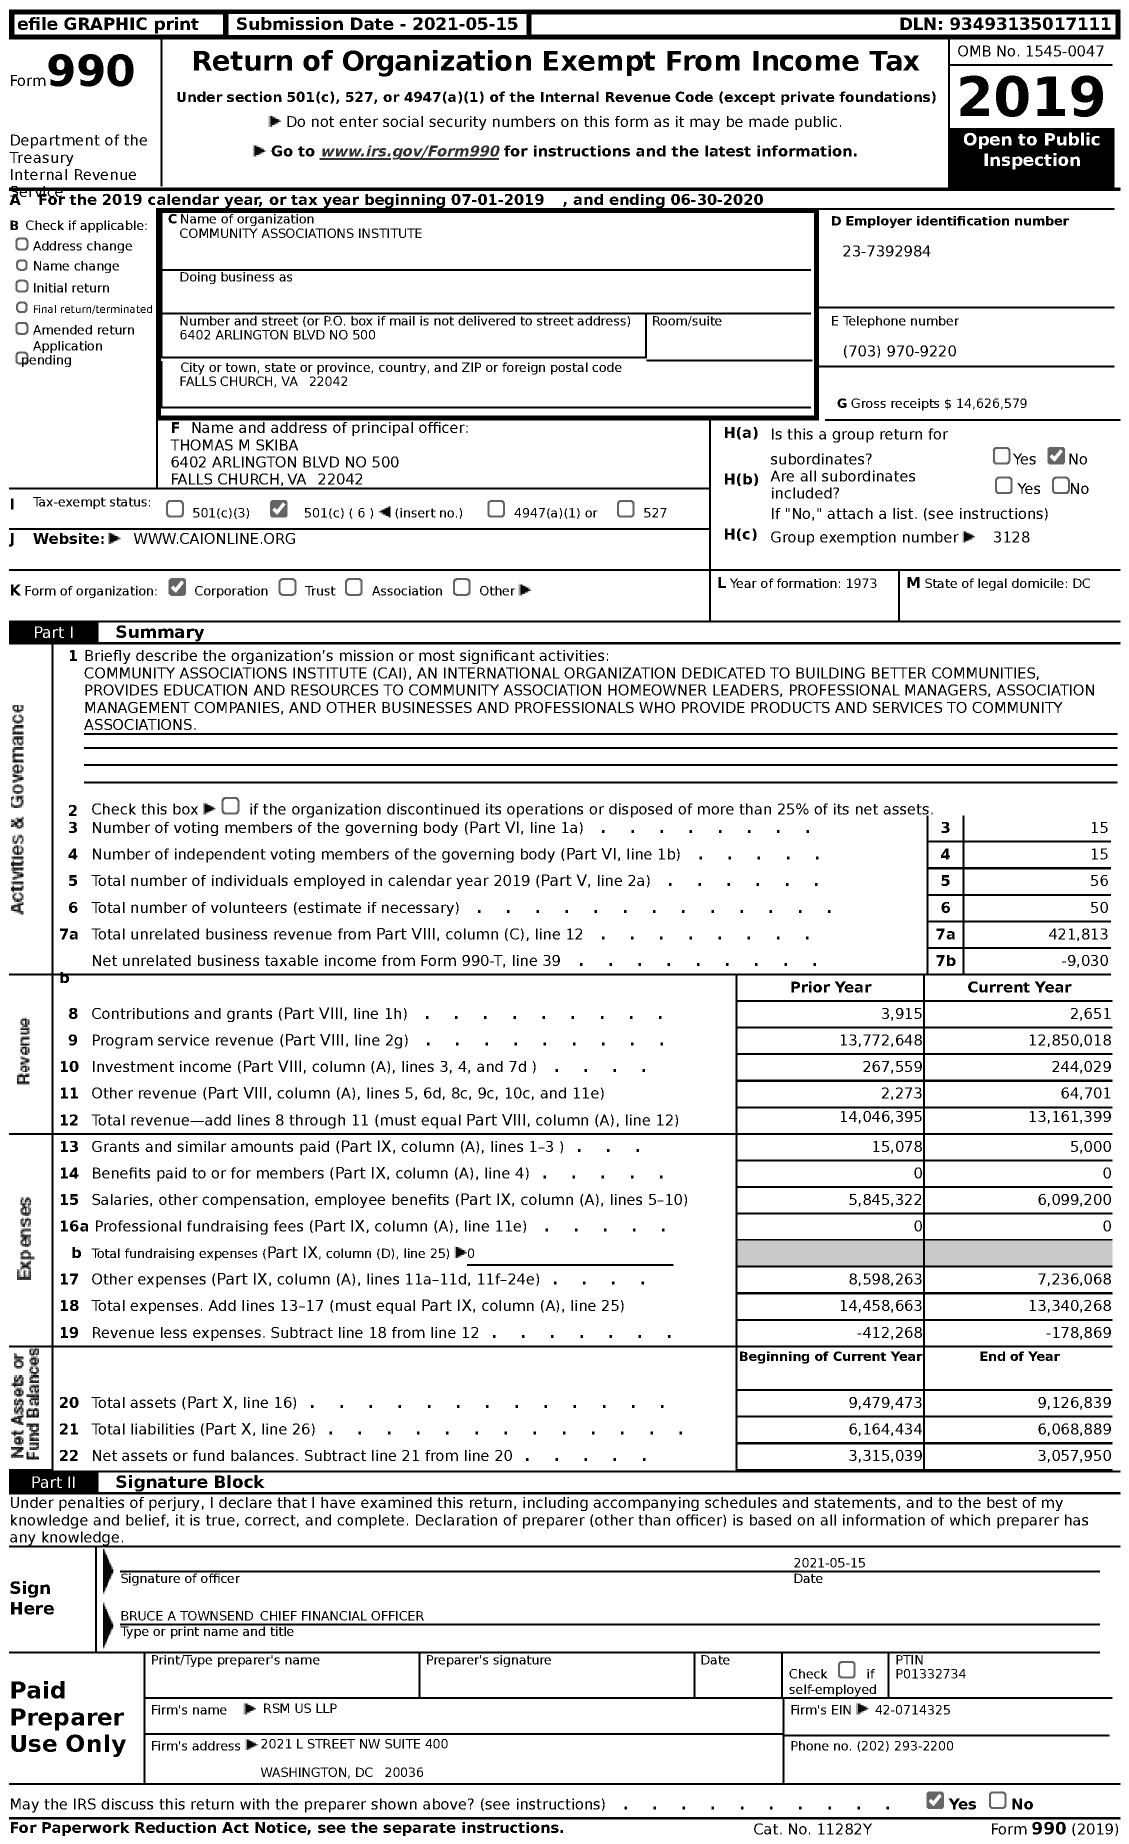 Image of first page of 2019 Form 990 for Community Associations Institute (CAI)